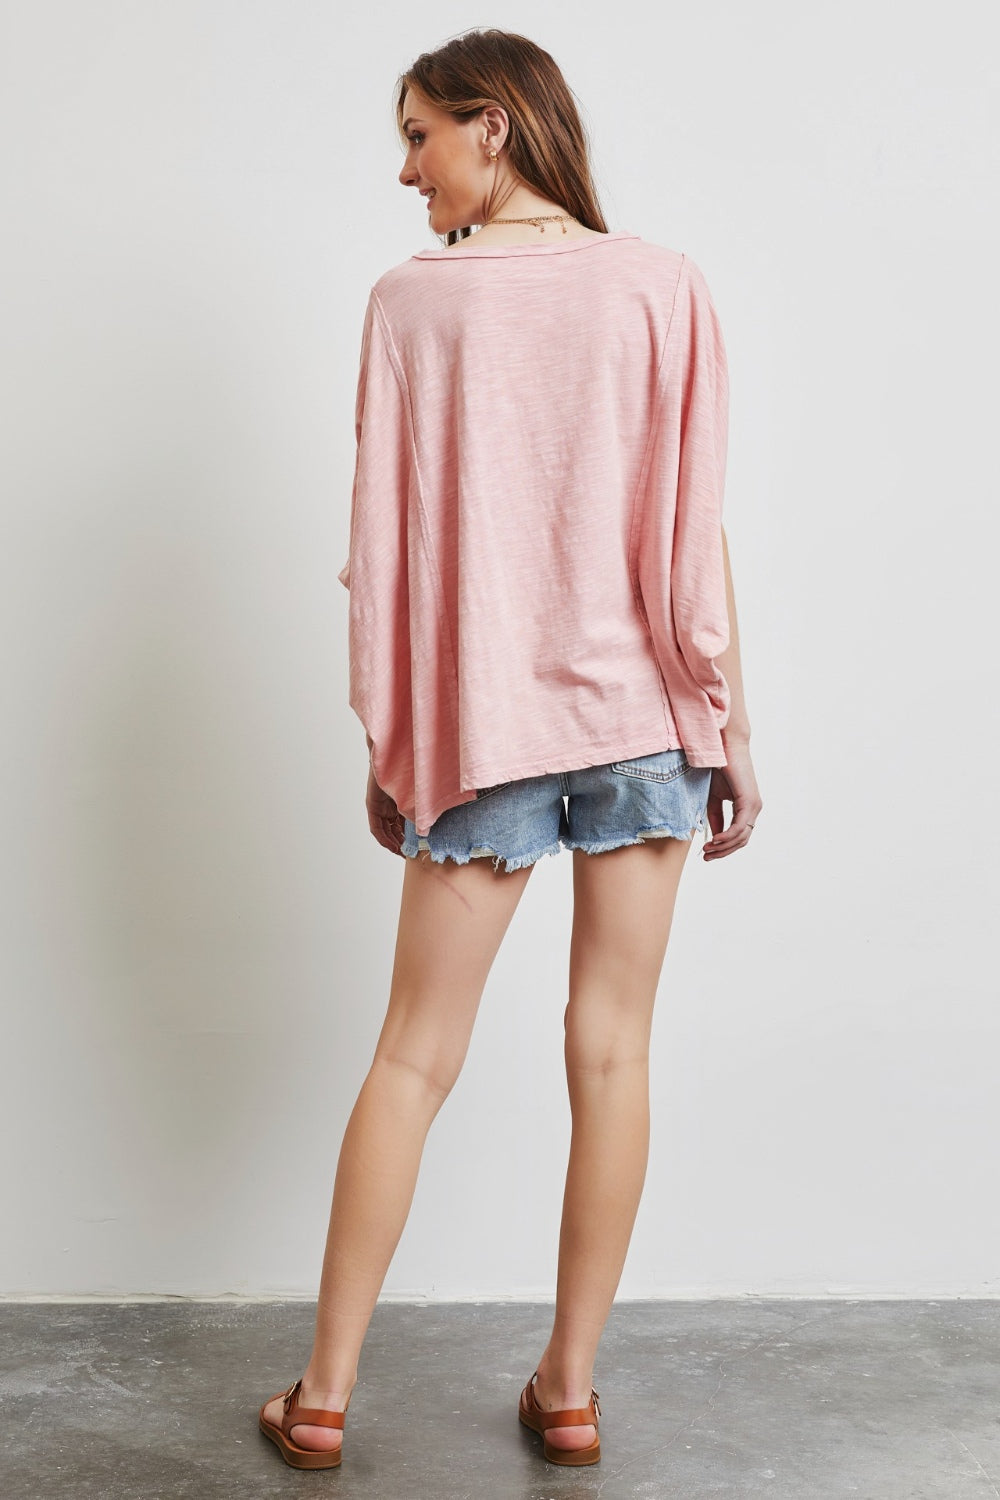 HEYSON Full Size Garment-Dyed Boat Neck Oversized Top - Casual Chic and Stylish Comfort